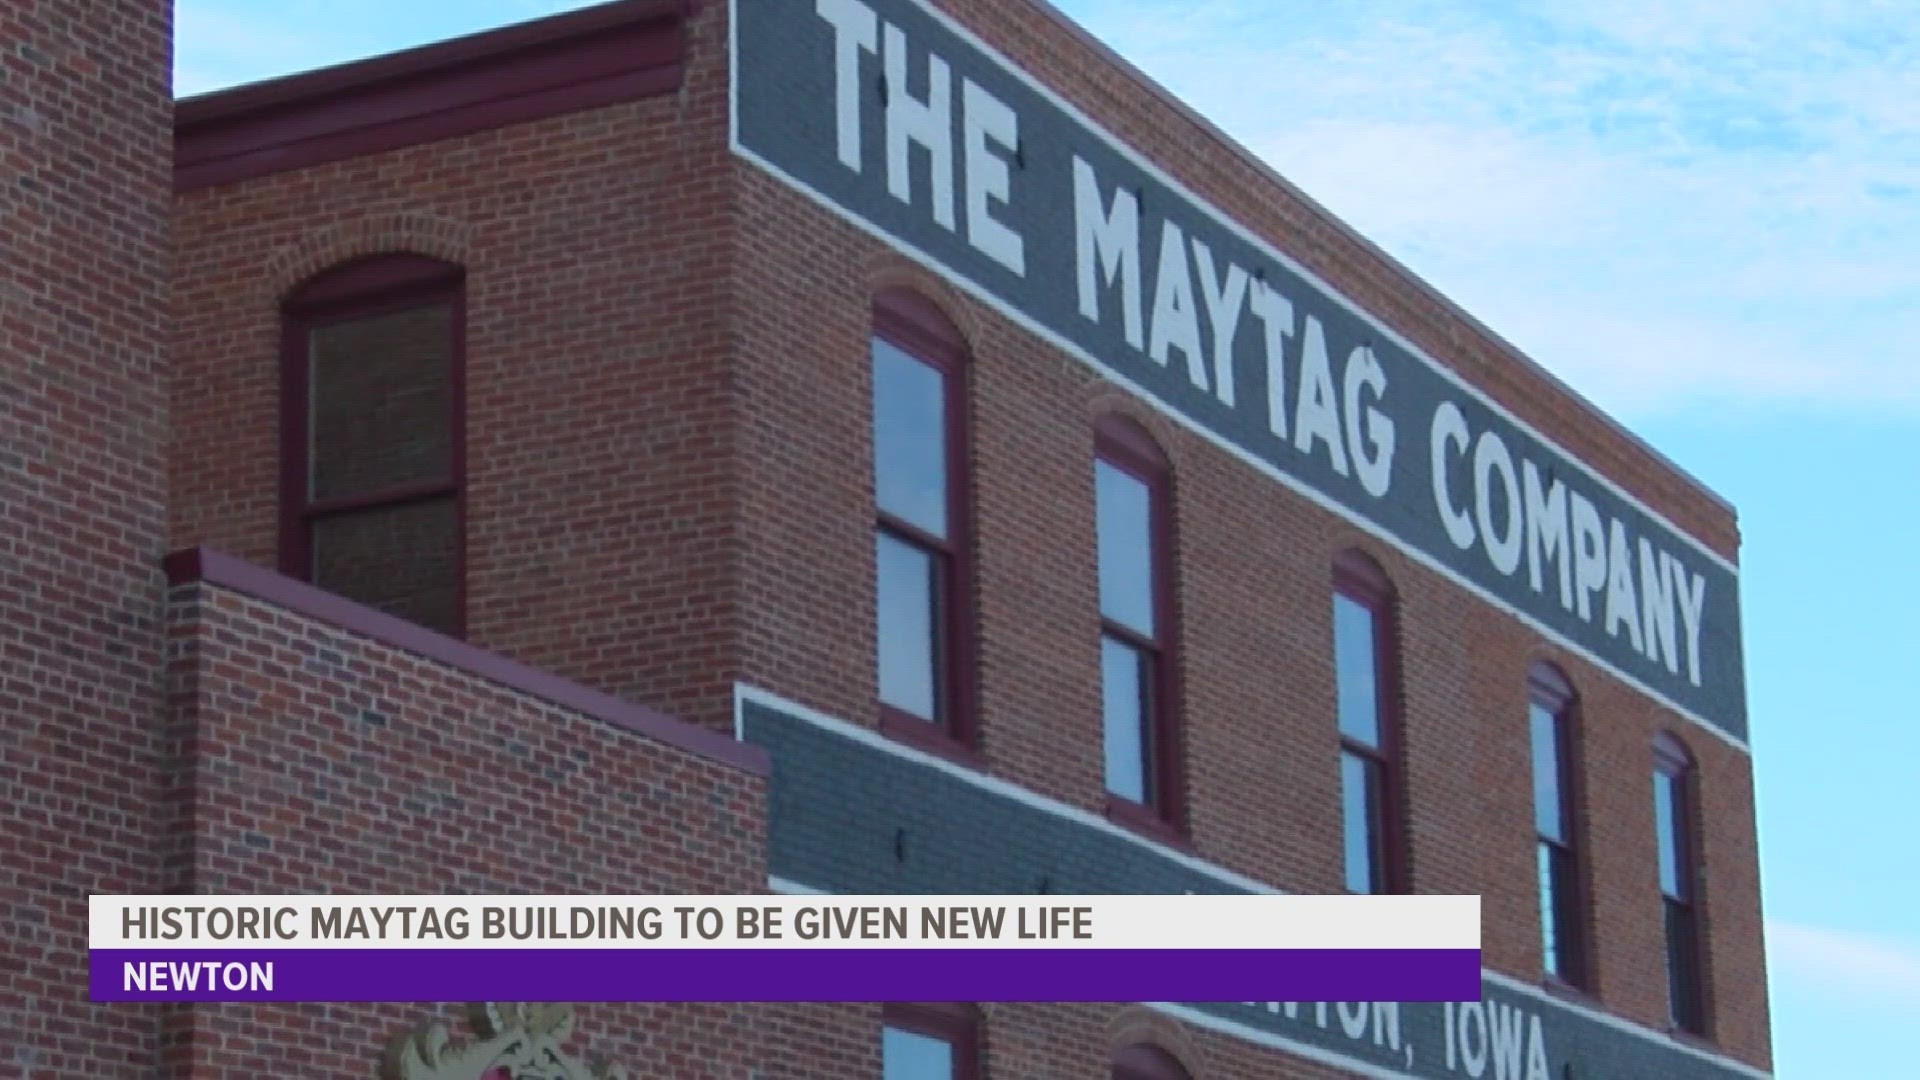 Ever since Maytag closed its doors in Newton nearly two decades ago, city leaders have been working to transform that space and bring people back in.